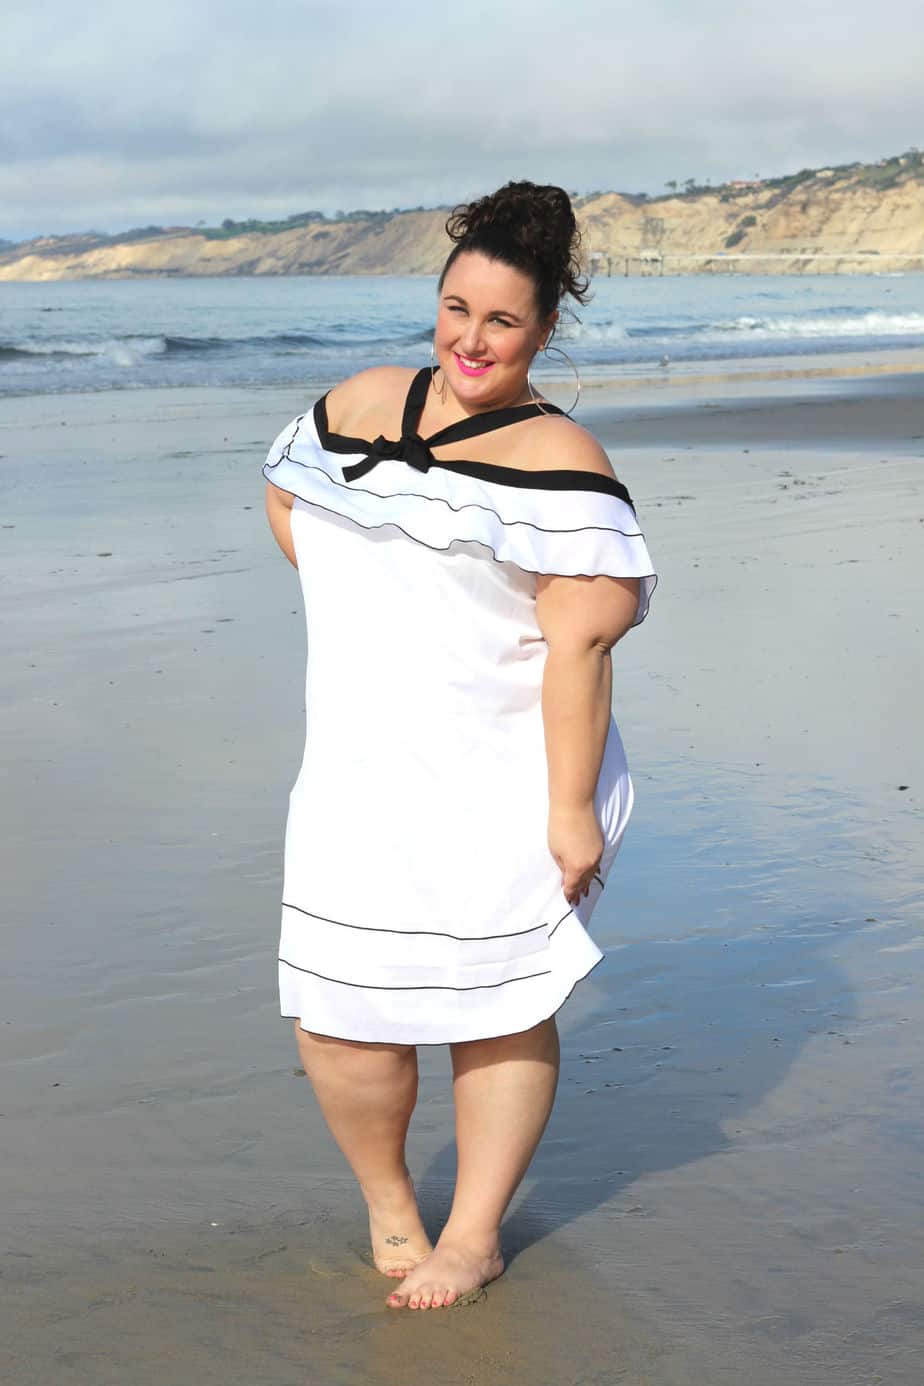 Plus Size Travel: My San Diego Style - Ready To Stare